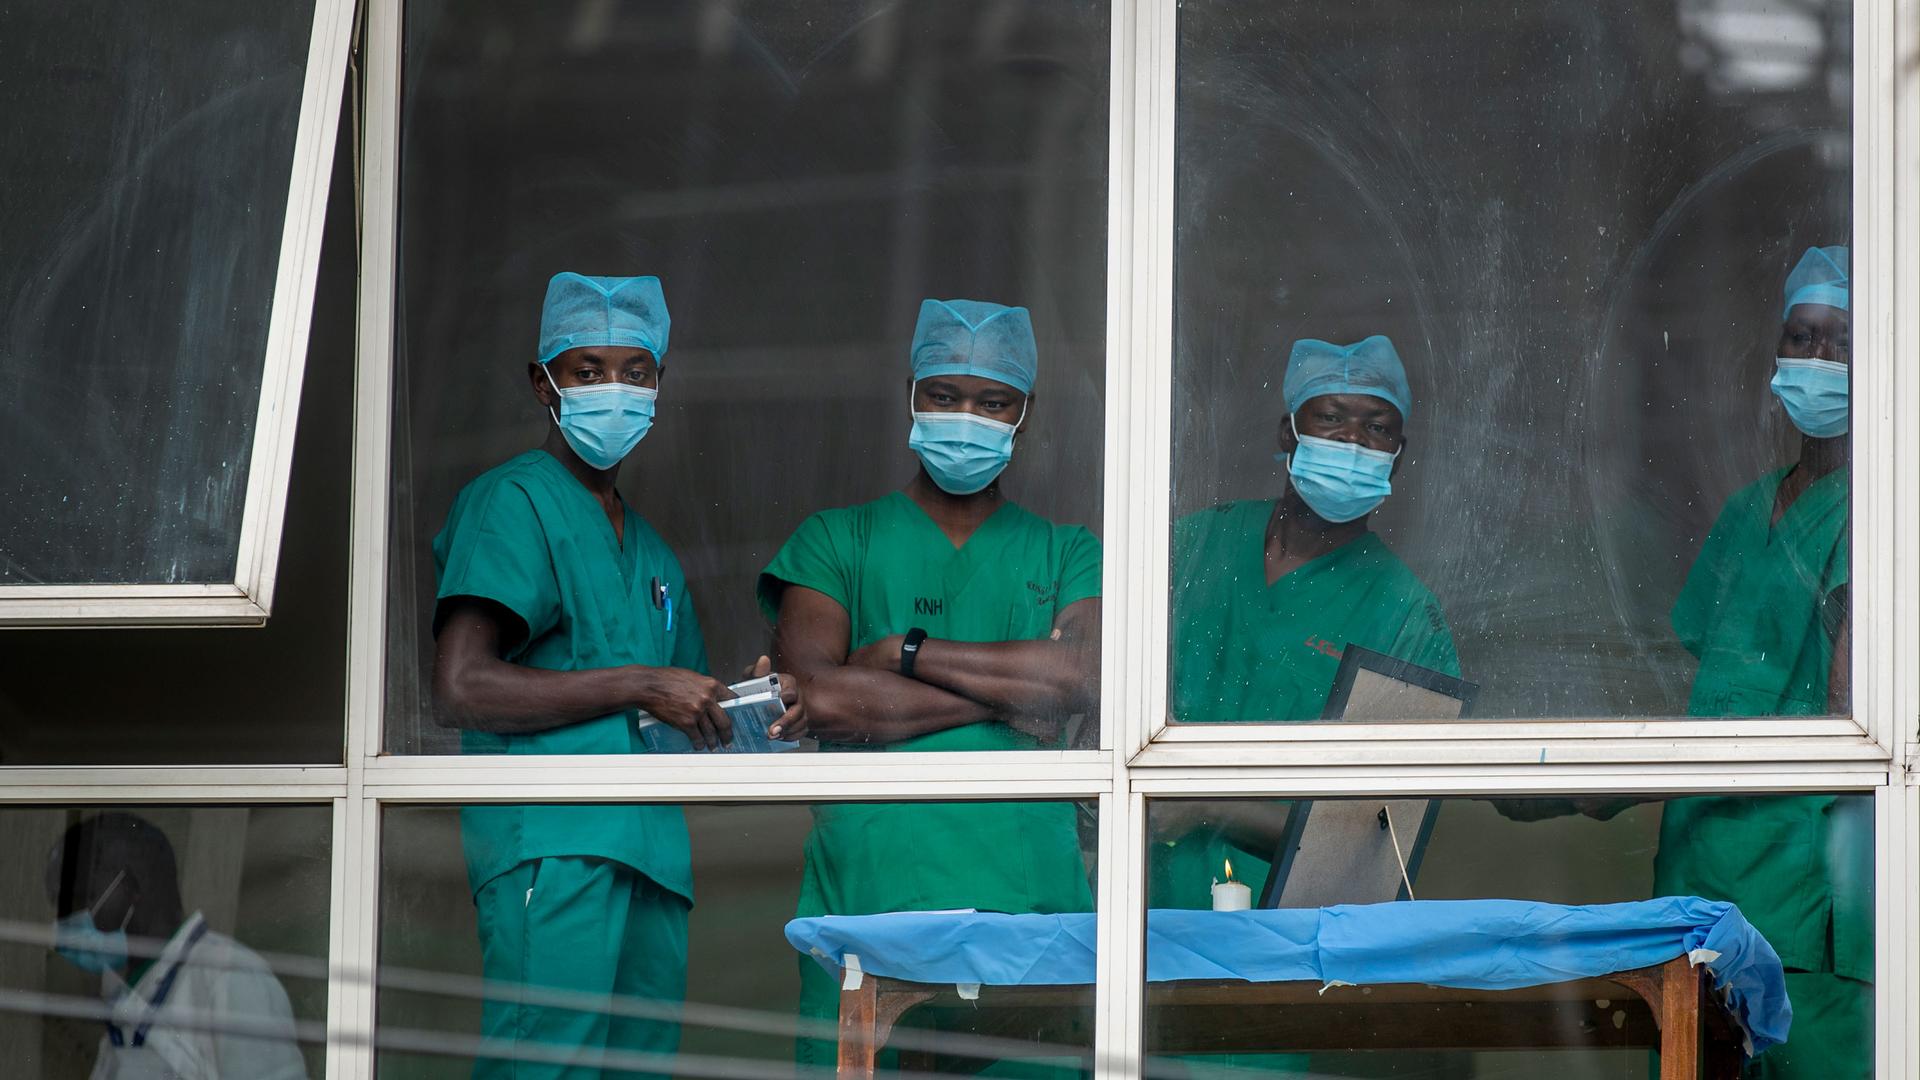 Four people are shown looking through a white-framed windows and wearing green medical scrubs.